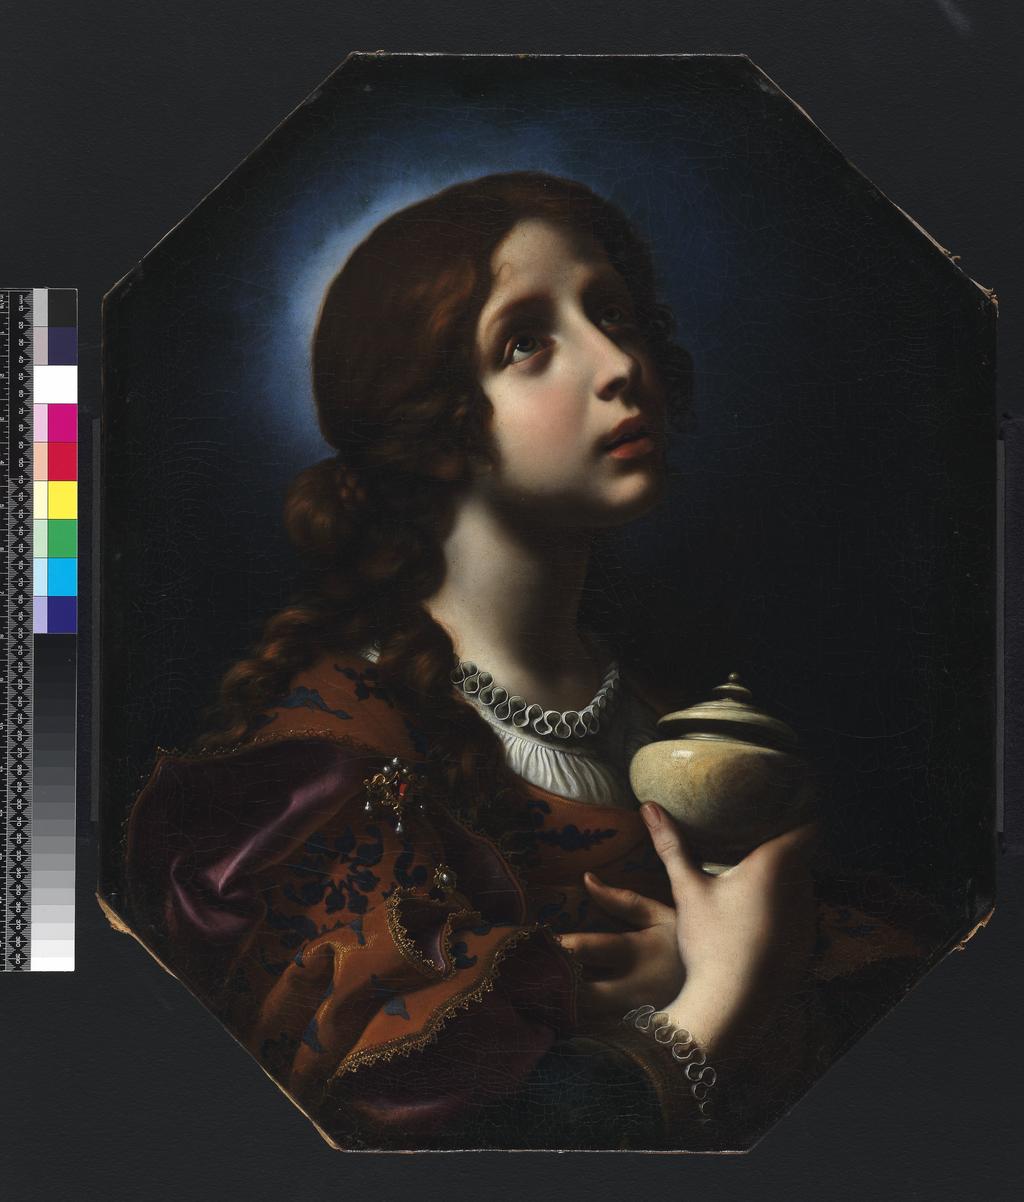 An image of The penitent Magdalene. Dolci, Carlo (Italian, 1616-1686). Oil on canvas. height, 64.4 cm, width, 52.7 cm, circa 1650- circa 1651.